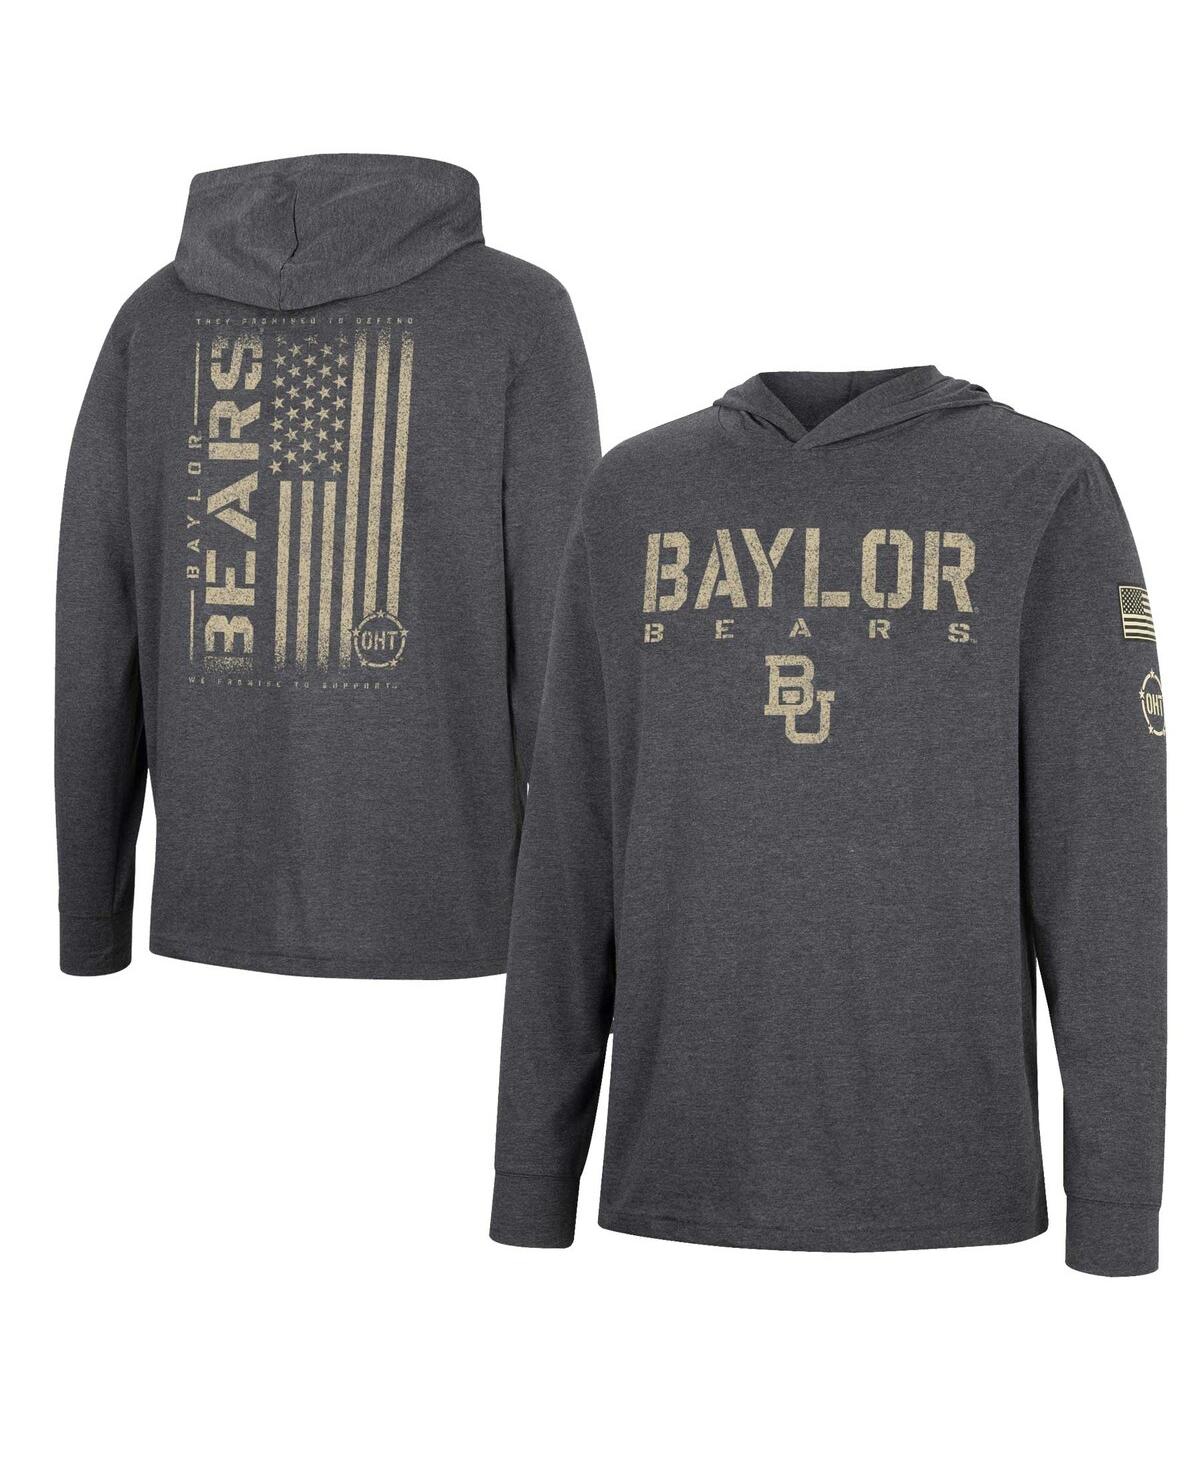 Colosseum Men's  Charcoal Baylor Bears Team Oht Military-inspired Appreciation Hoodie Long Sleeve T-s